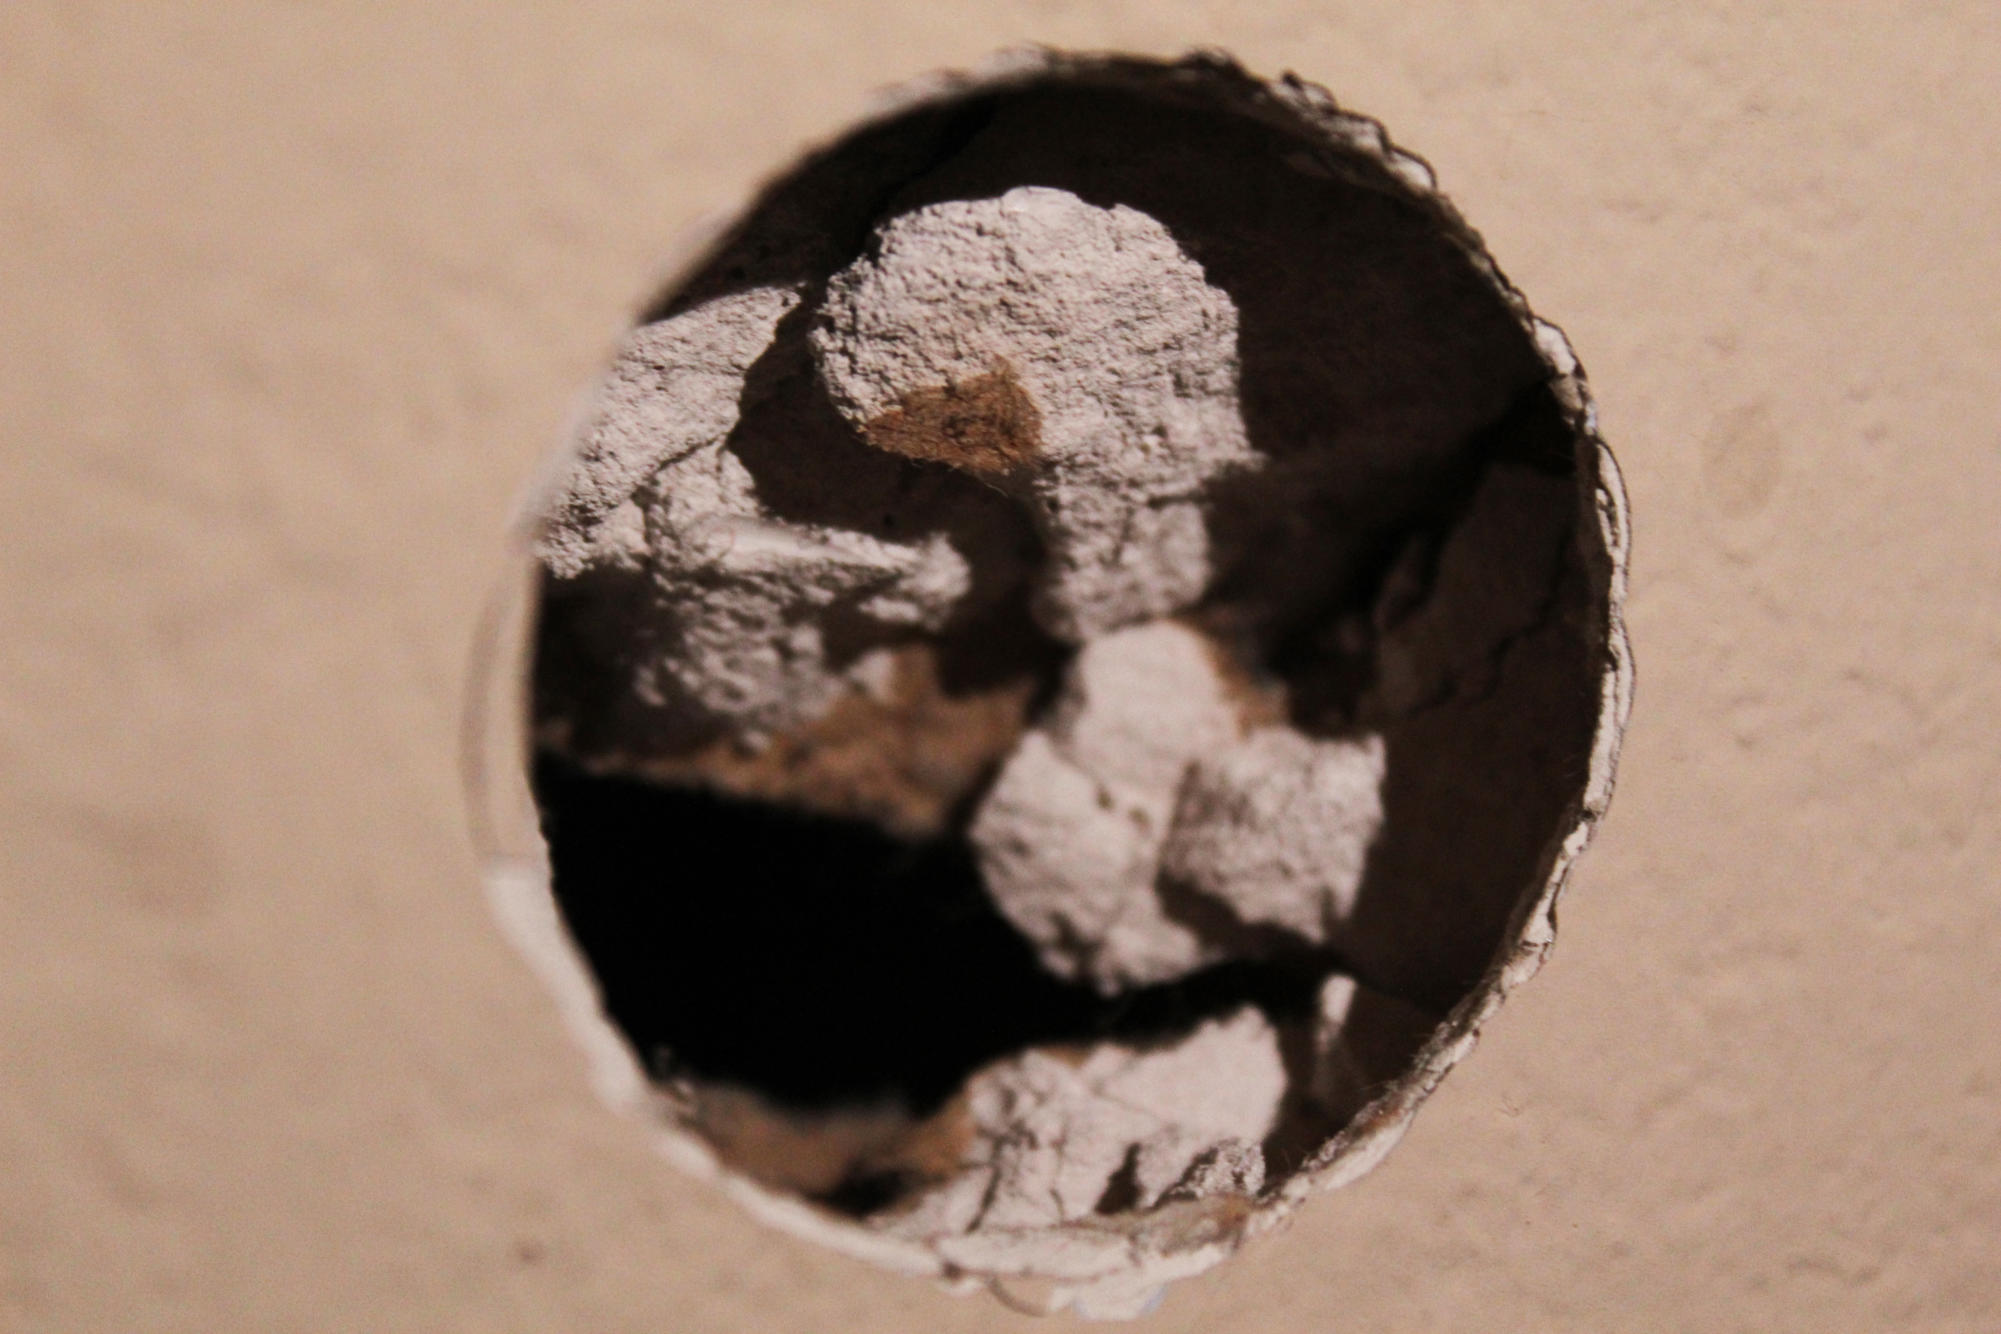 A hole in the wall of the master bedroom of the Fredericks’ house made during an argument between Izzy and her parents. The hole was made when Izzy slammed a door open after Minerva closed it.